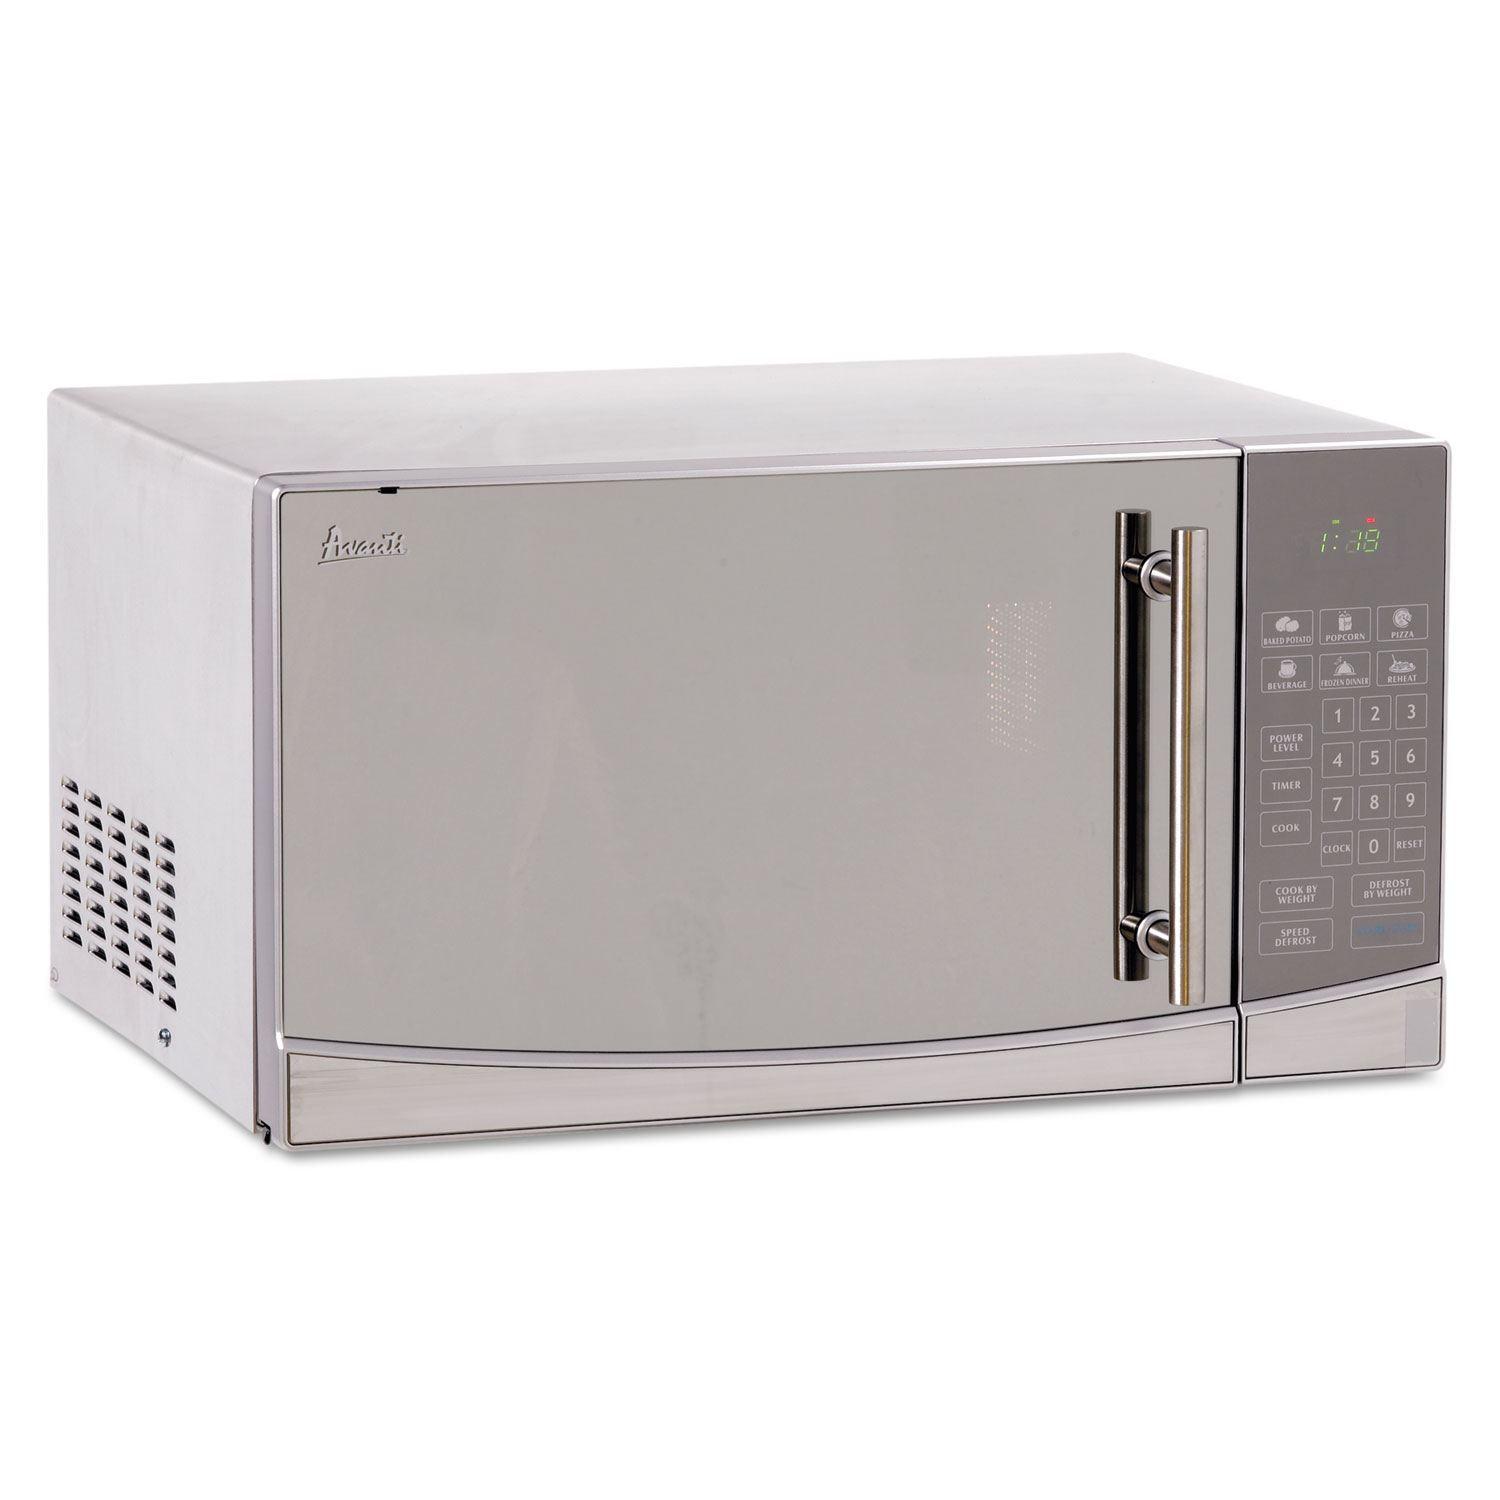  Avanti MO1108SST 1.1 Cubic Foot Capacity Stainless Steel Touch Microwave Oven, 1000 Watts (AVAMO1108SST) 